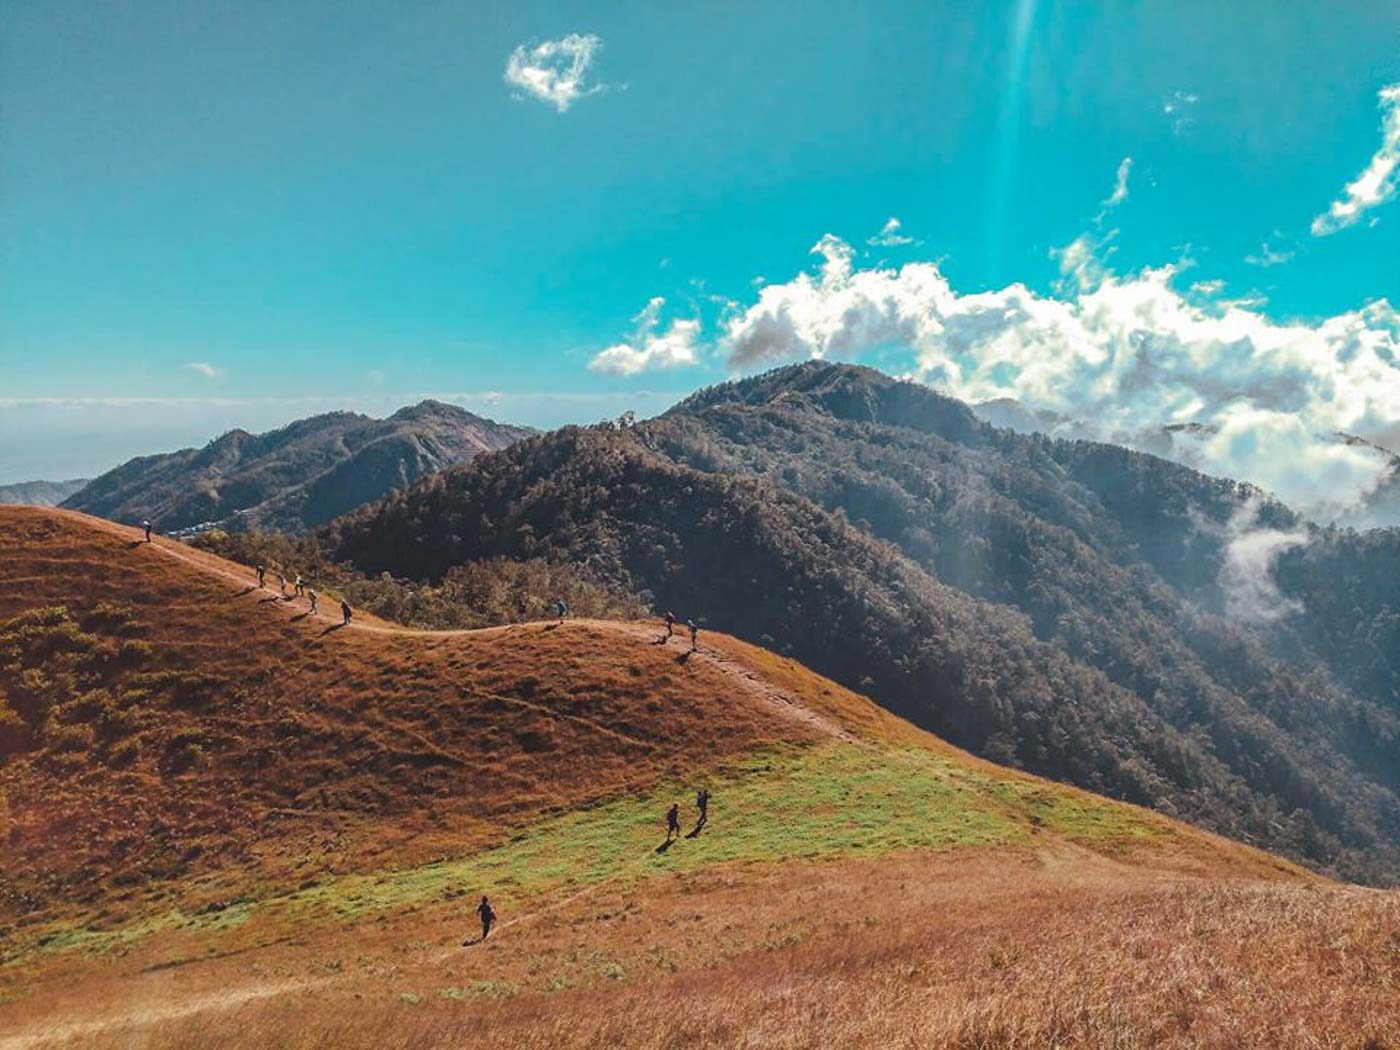 PICTURESQUE.  With its pine trees, grasslands, and mountain backdrop, Mt. Ulap is picturesque anywhere. Photo by Regine dela Peña of @alwaysonthegogirl, Instagram 